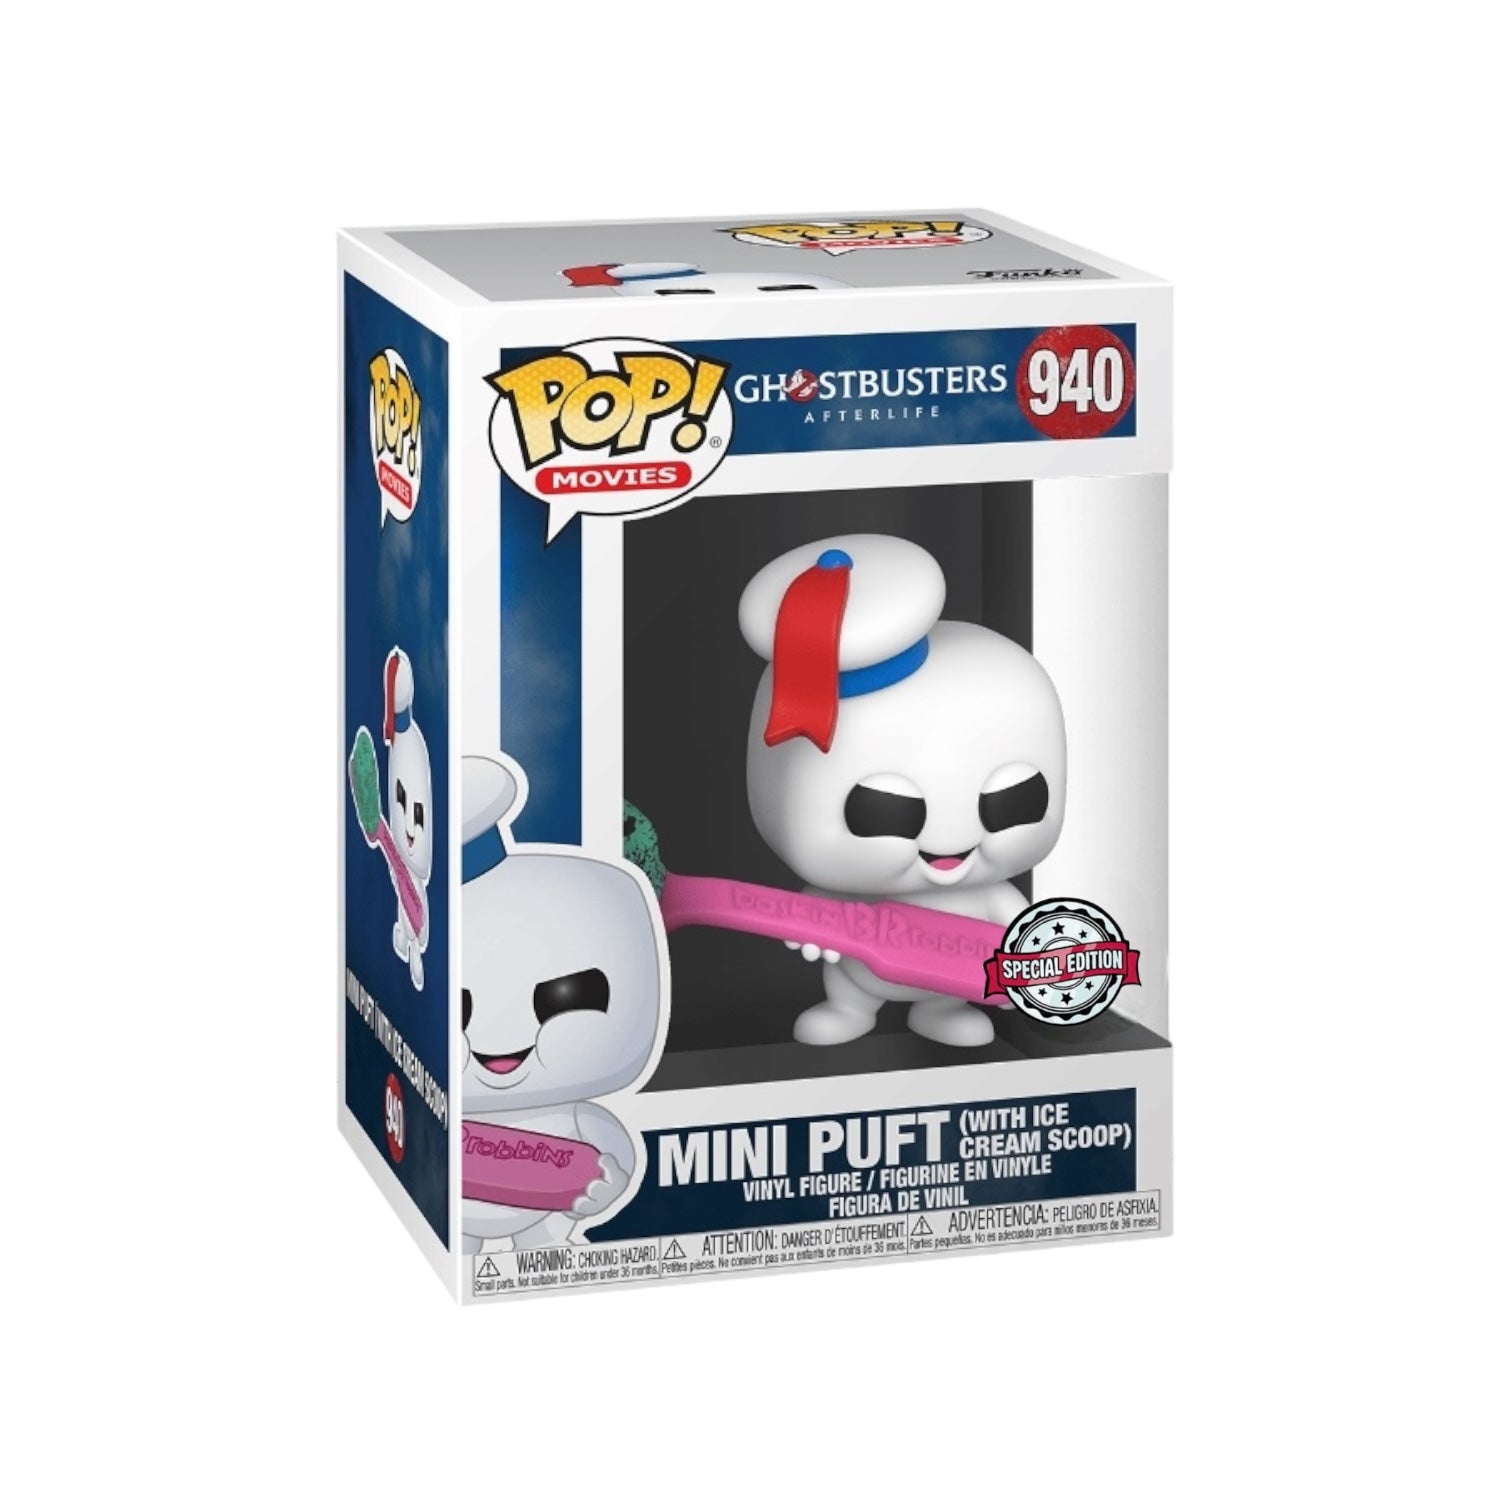 Mini Puft with ice cream scoop #940 Funko Pop! - Ghostbusters Afterlife - Special Edition